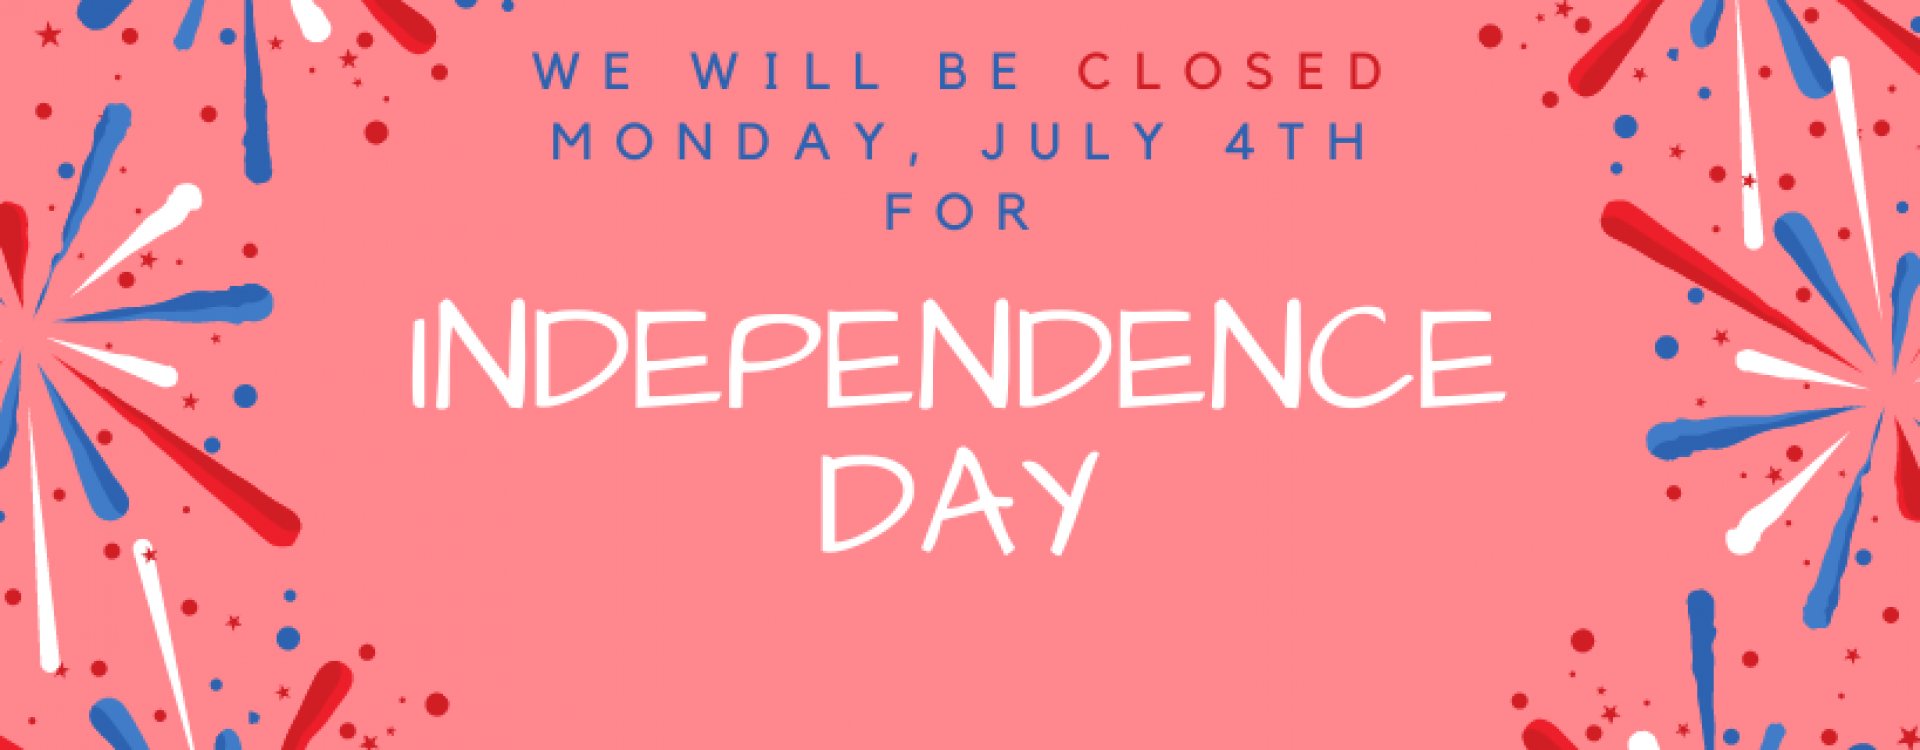 we will be closed Monday, July 4th for Independence Day